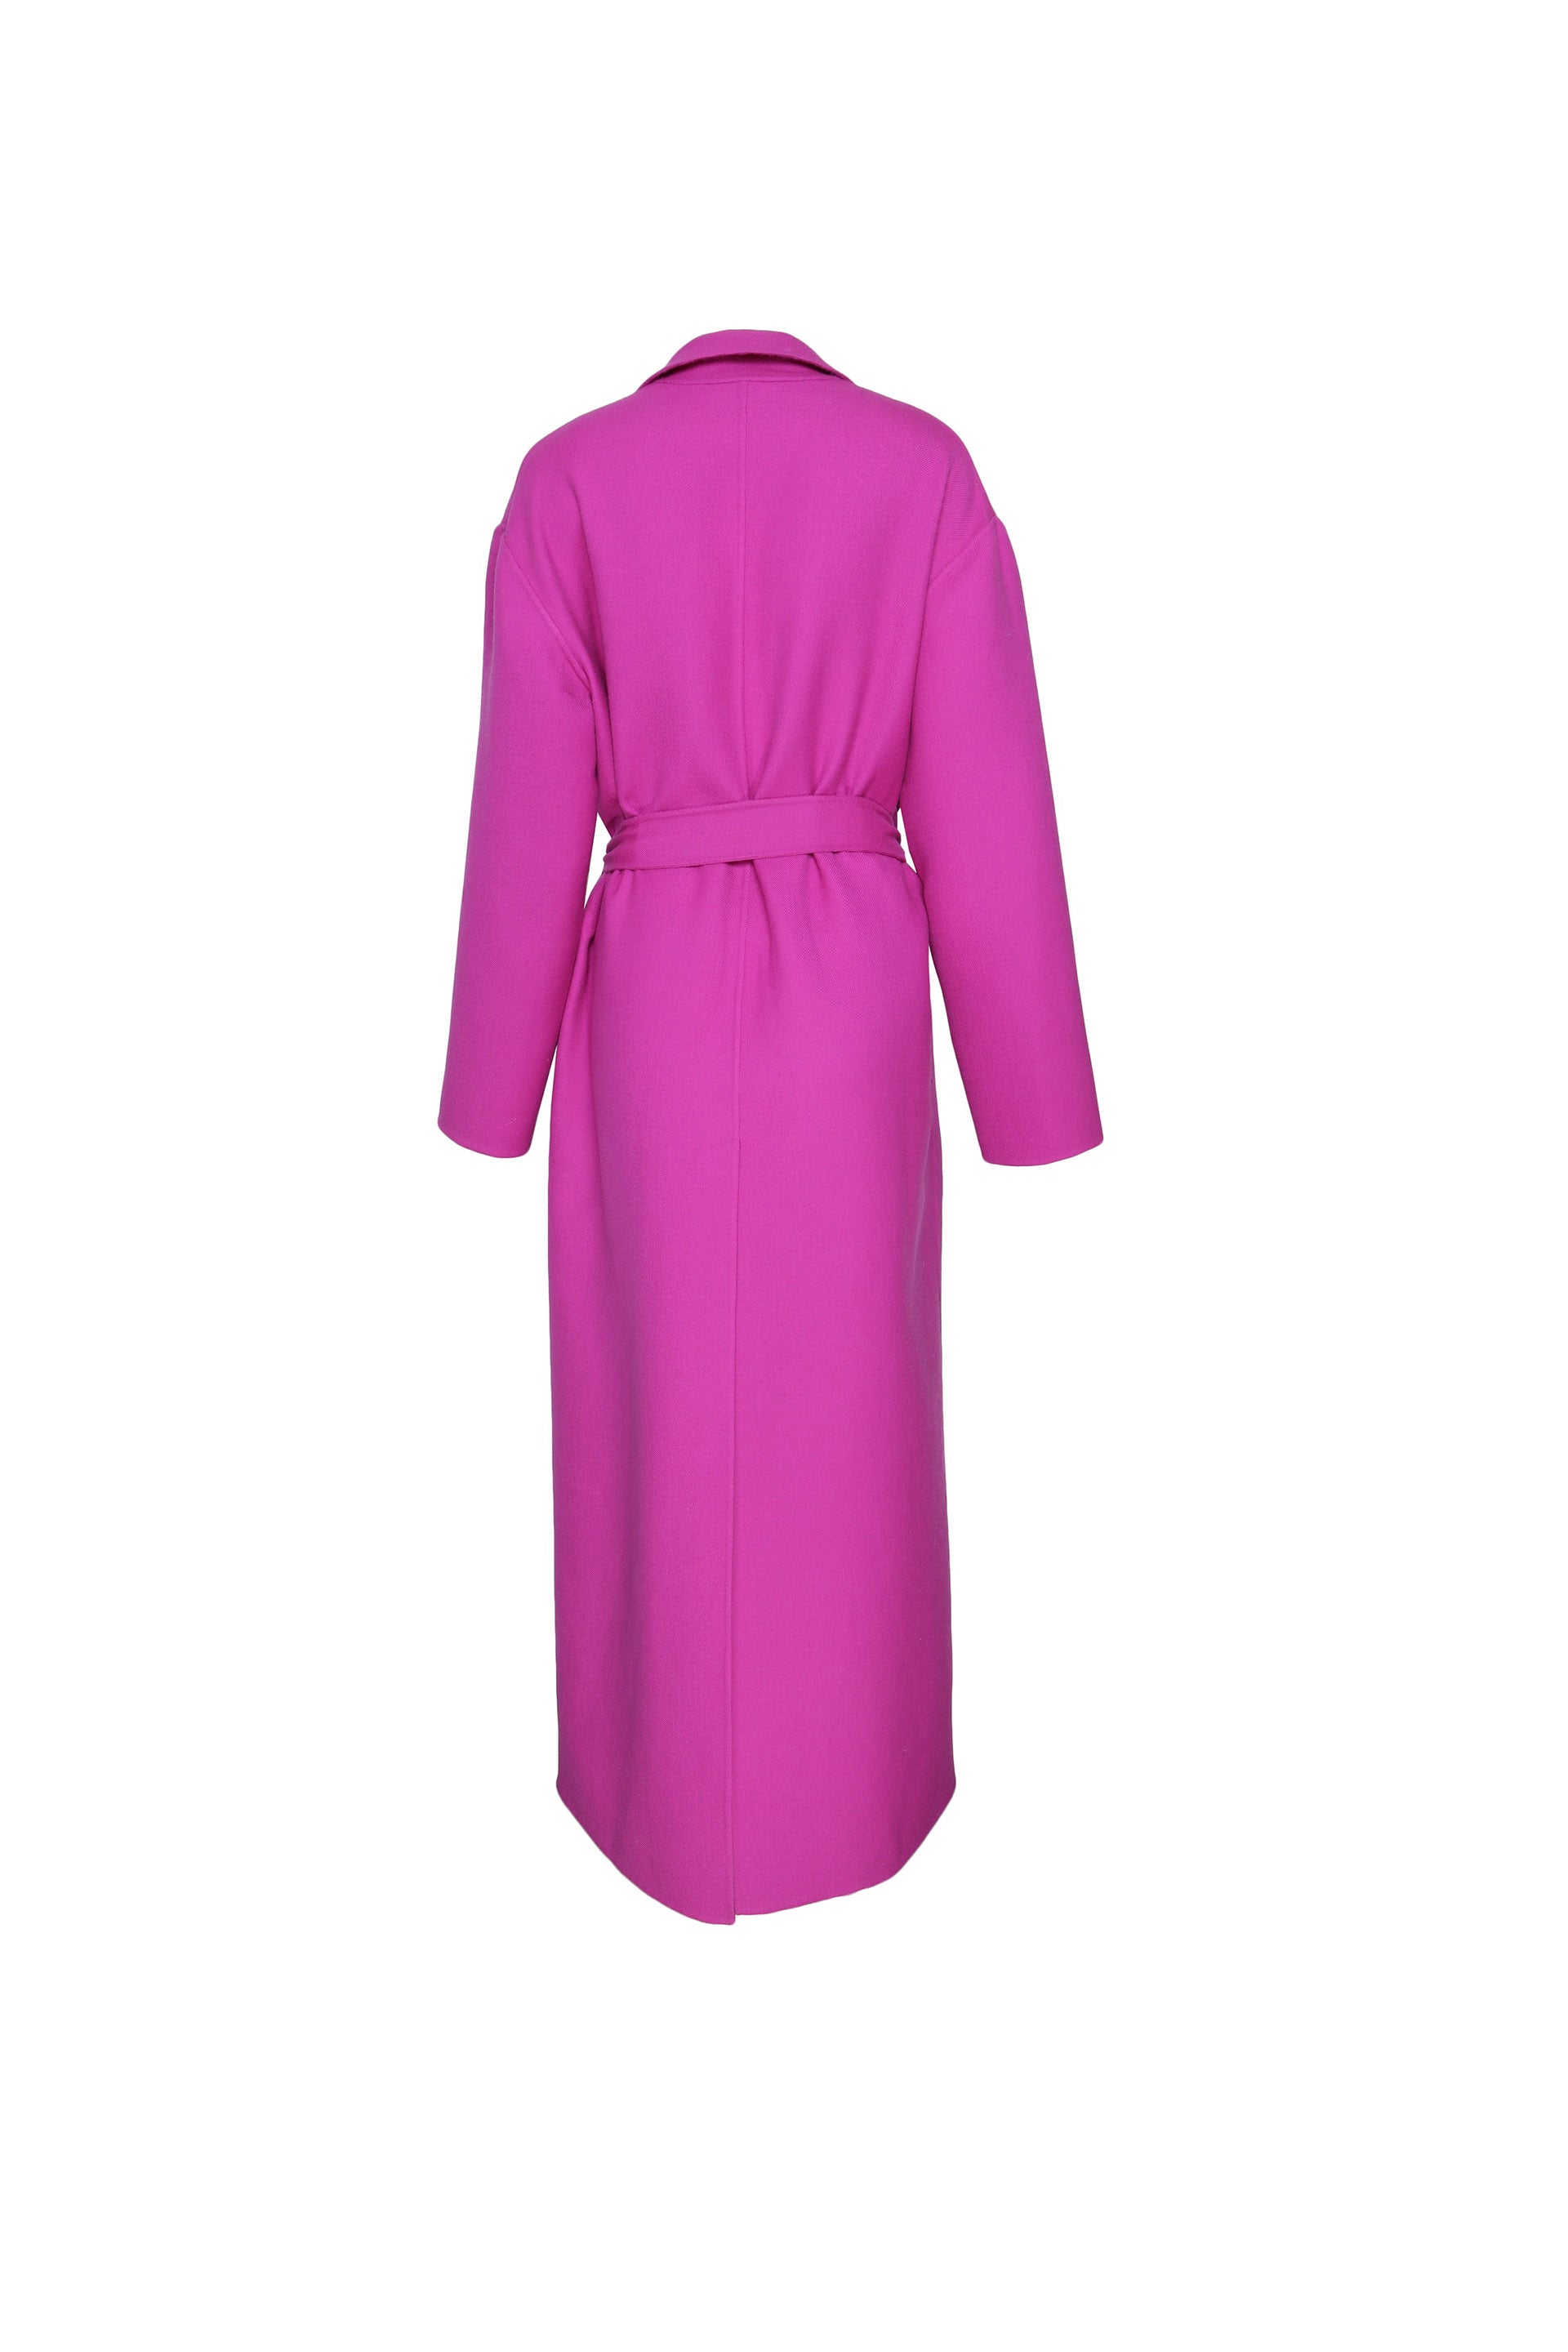 Relaxed Wool Robe Coat